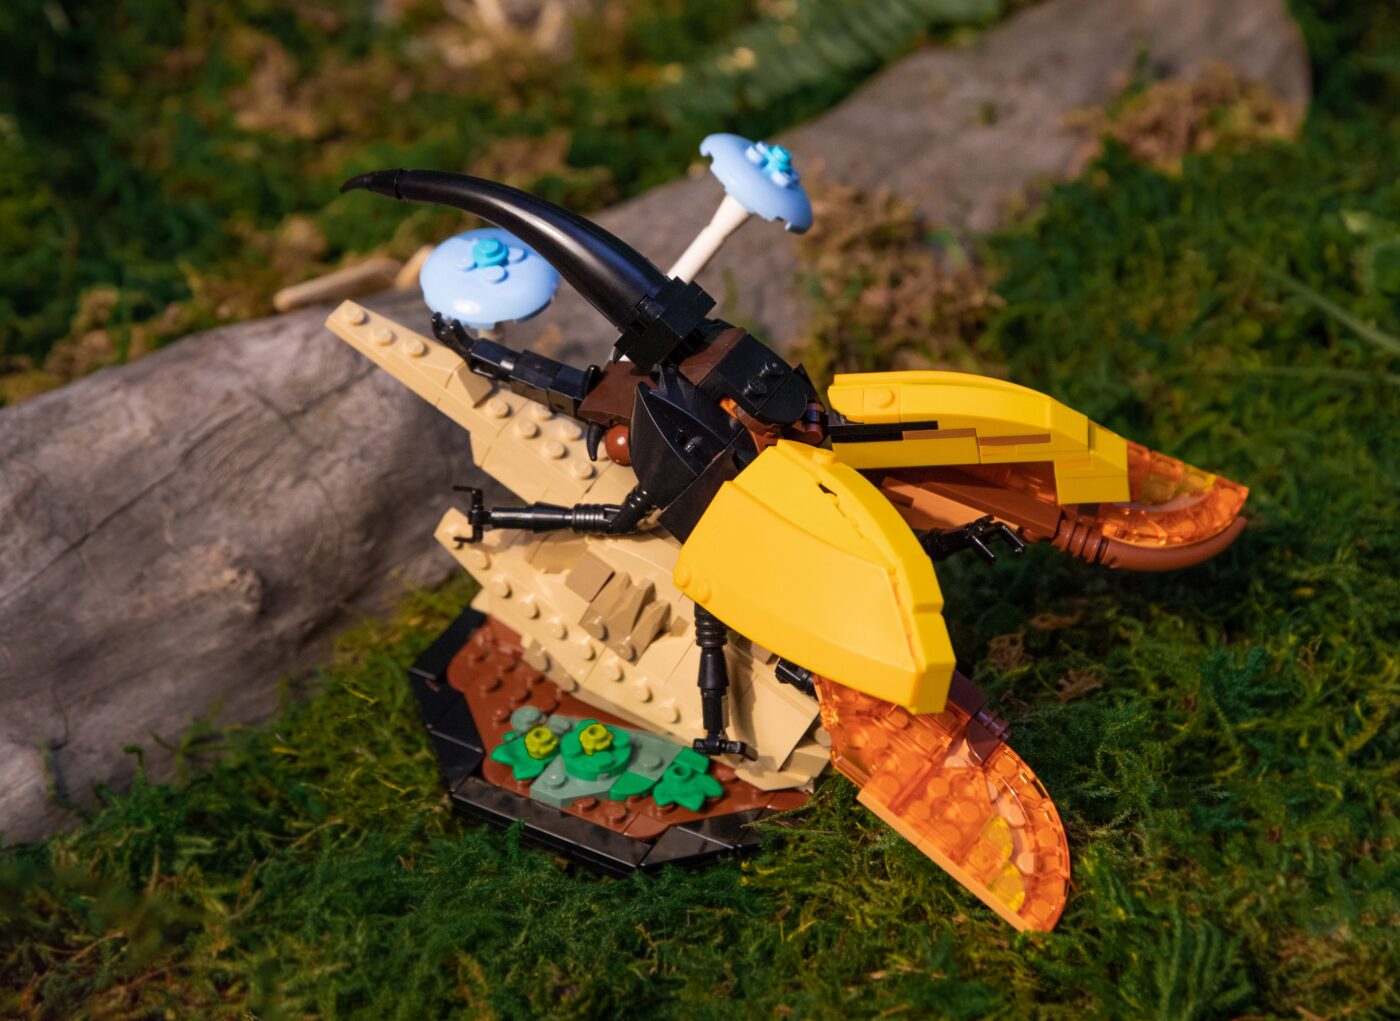 21342 LEGO Insect Collection Hercules Beetle Photo Shoot